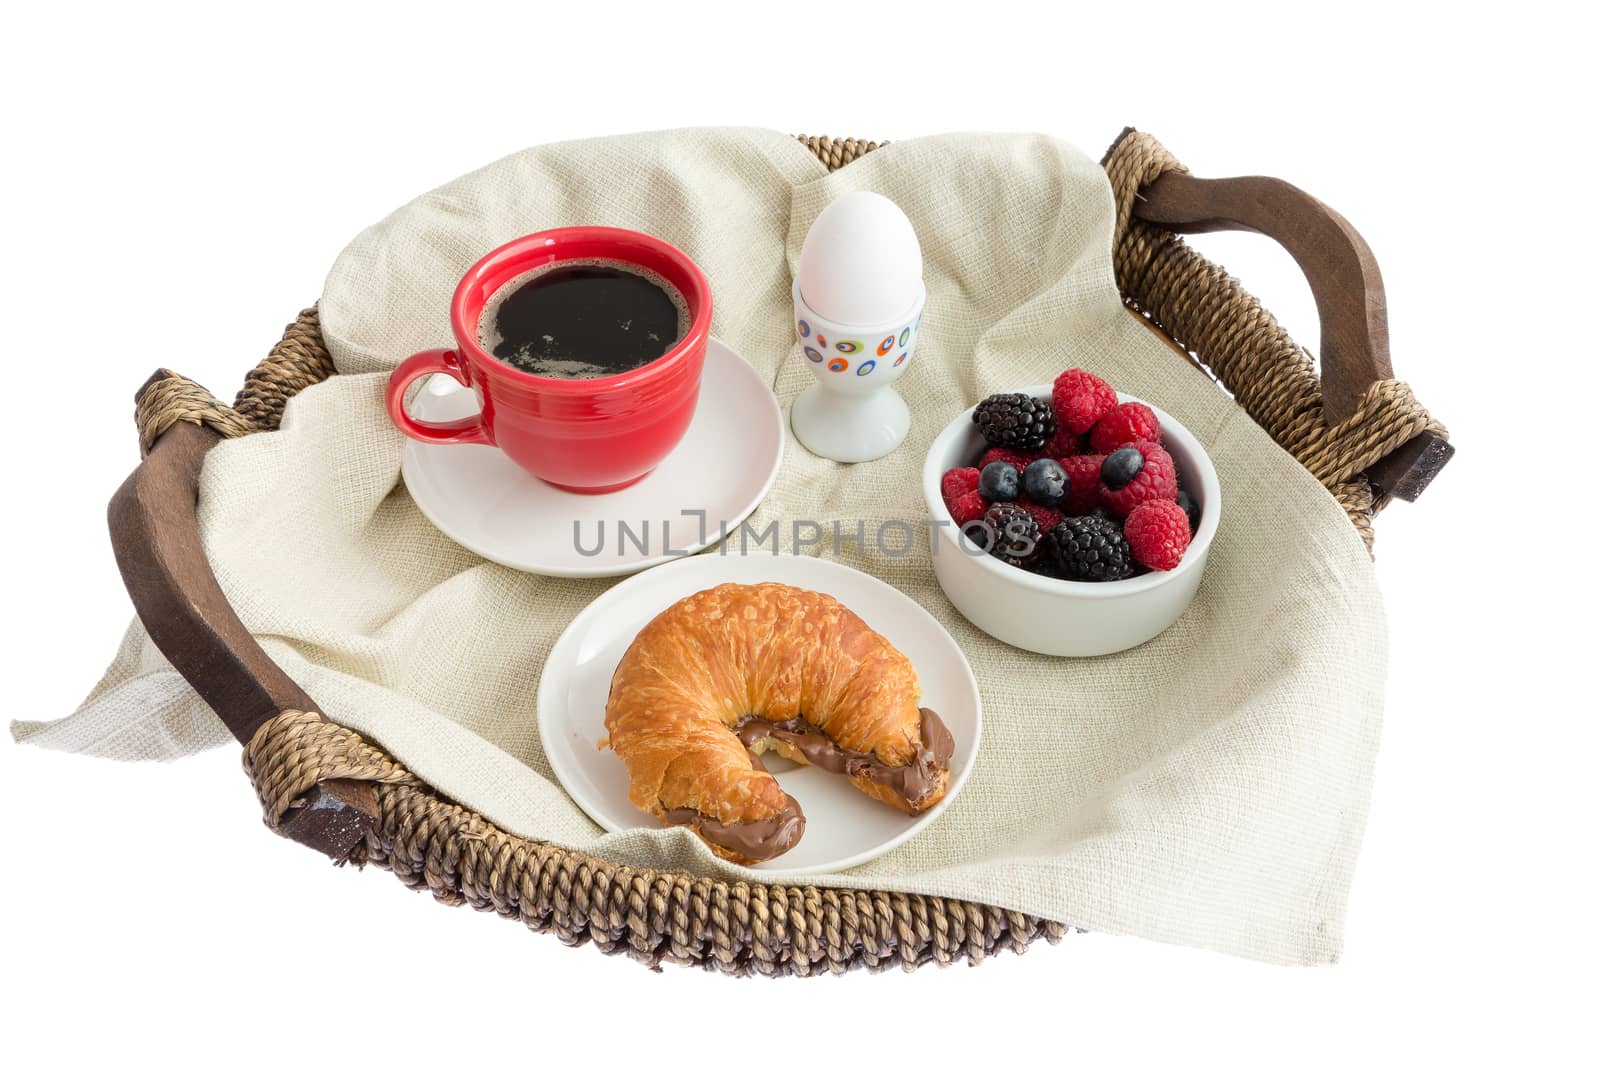 High Angle View of Appetizing Breakfast Tray - Hard Boiled Egg, Black Coffee, Bowl of Mixed Berries, and Croissant with Hazelnut Spread - on White Background